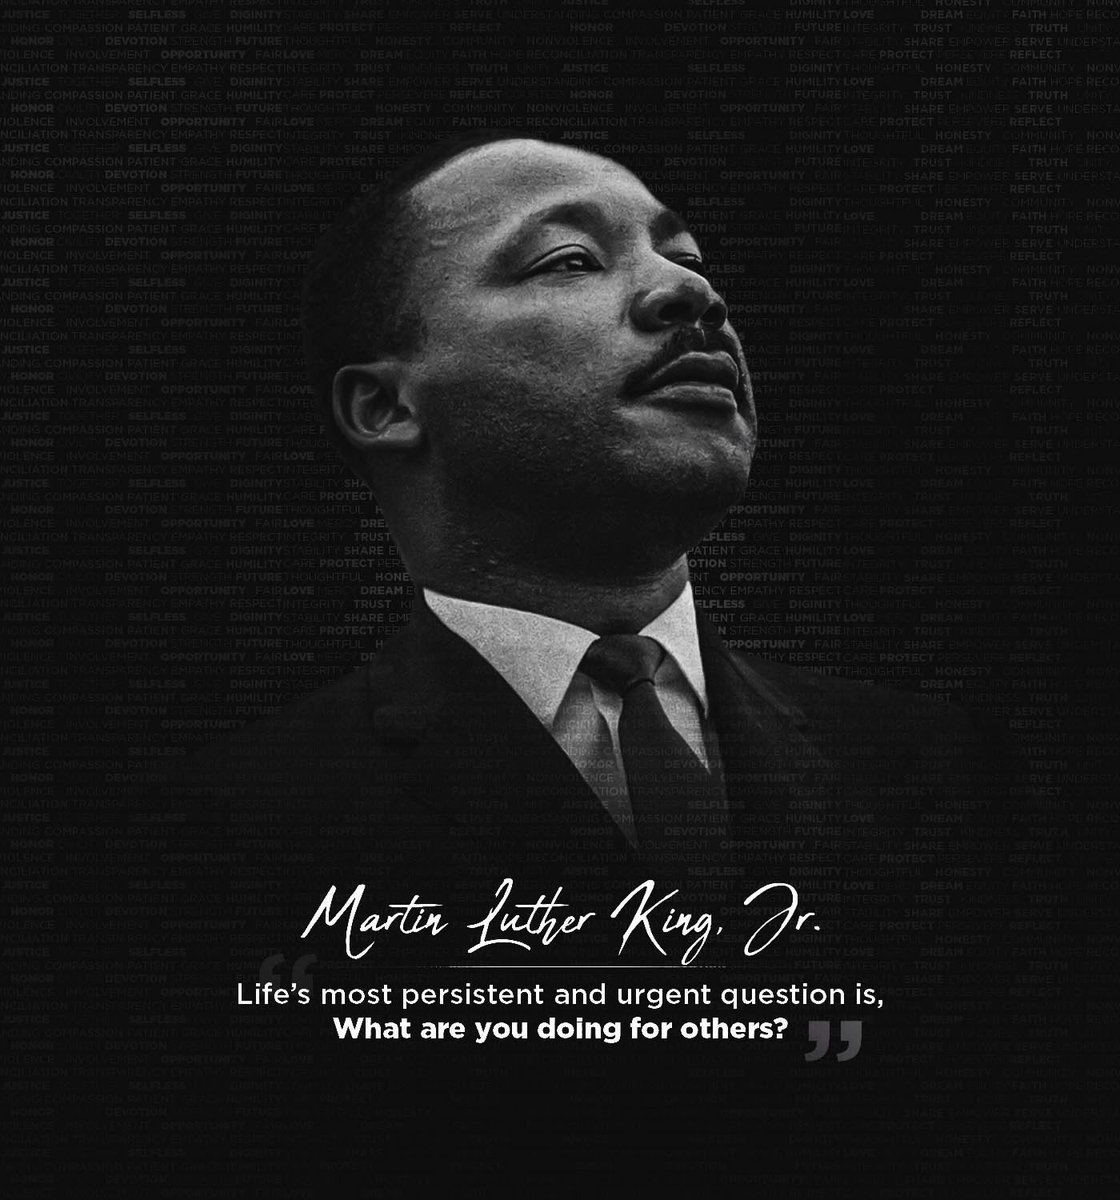 MLK's persistent and urgent life question quote